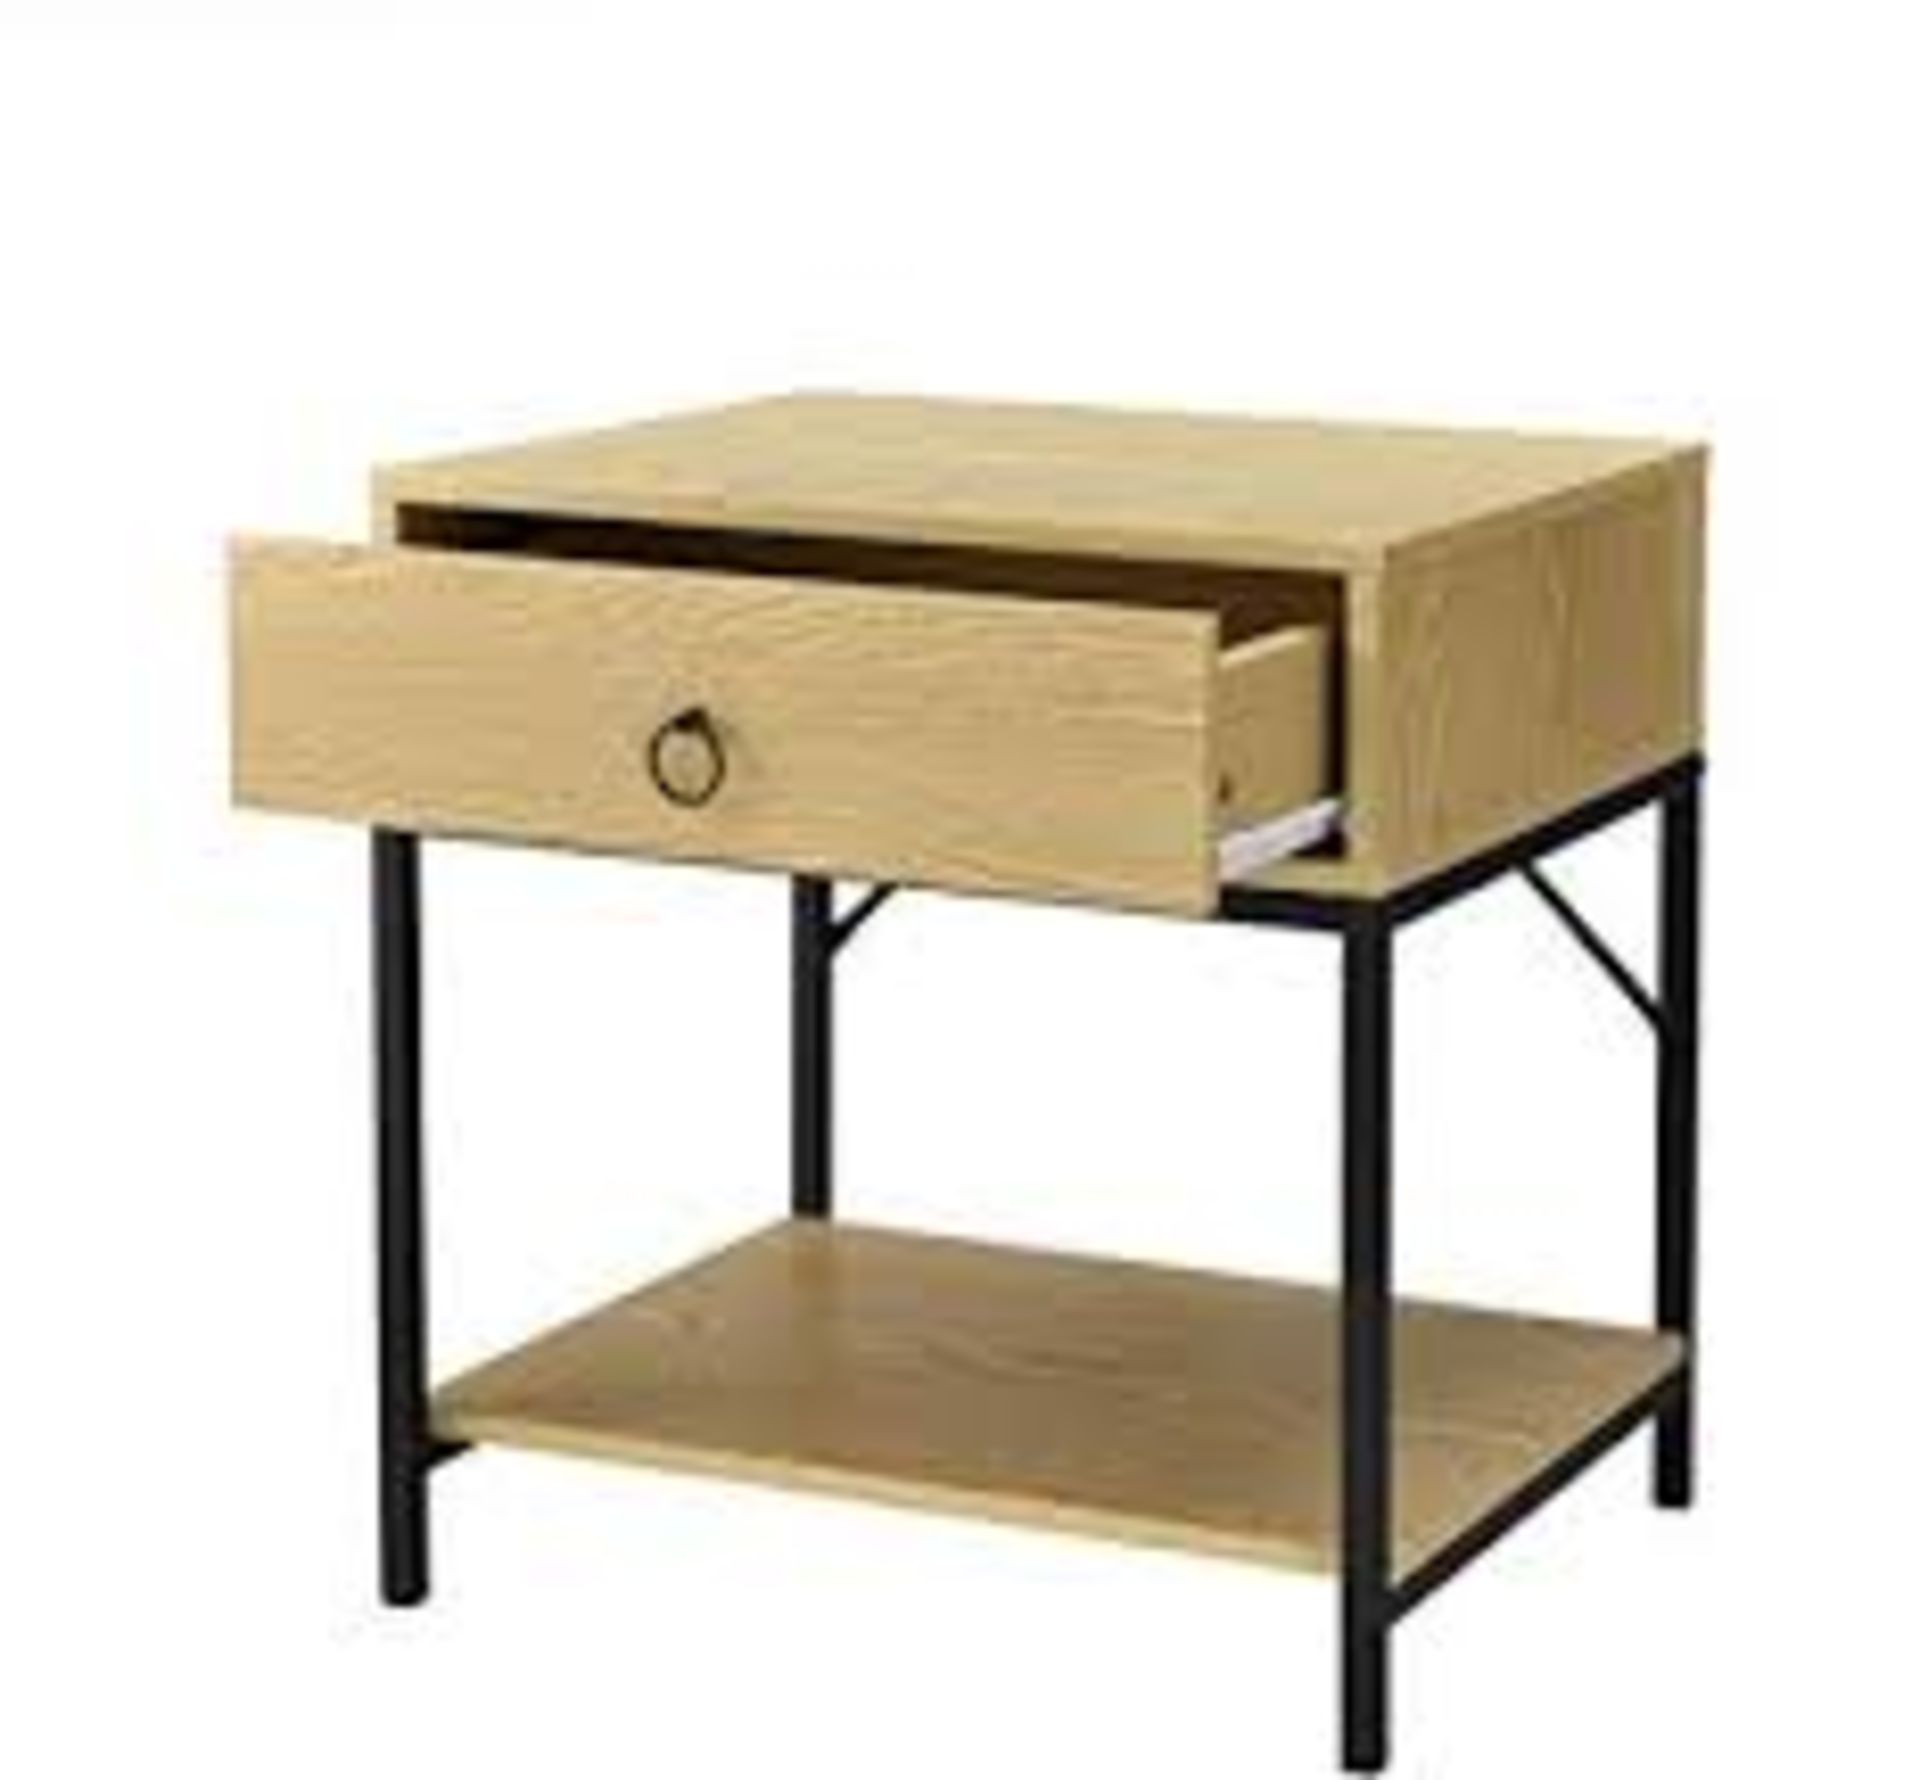 Boxed Golden Oak Single Draw Paris Bedside Tables With Metal Legs RRP £60 (Sourced From A High End